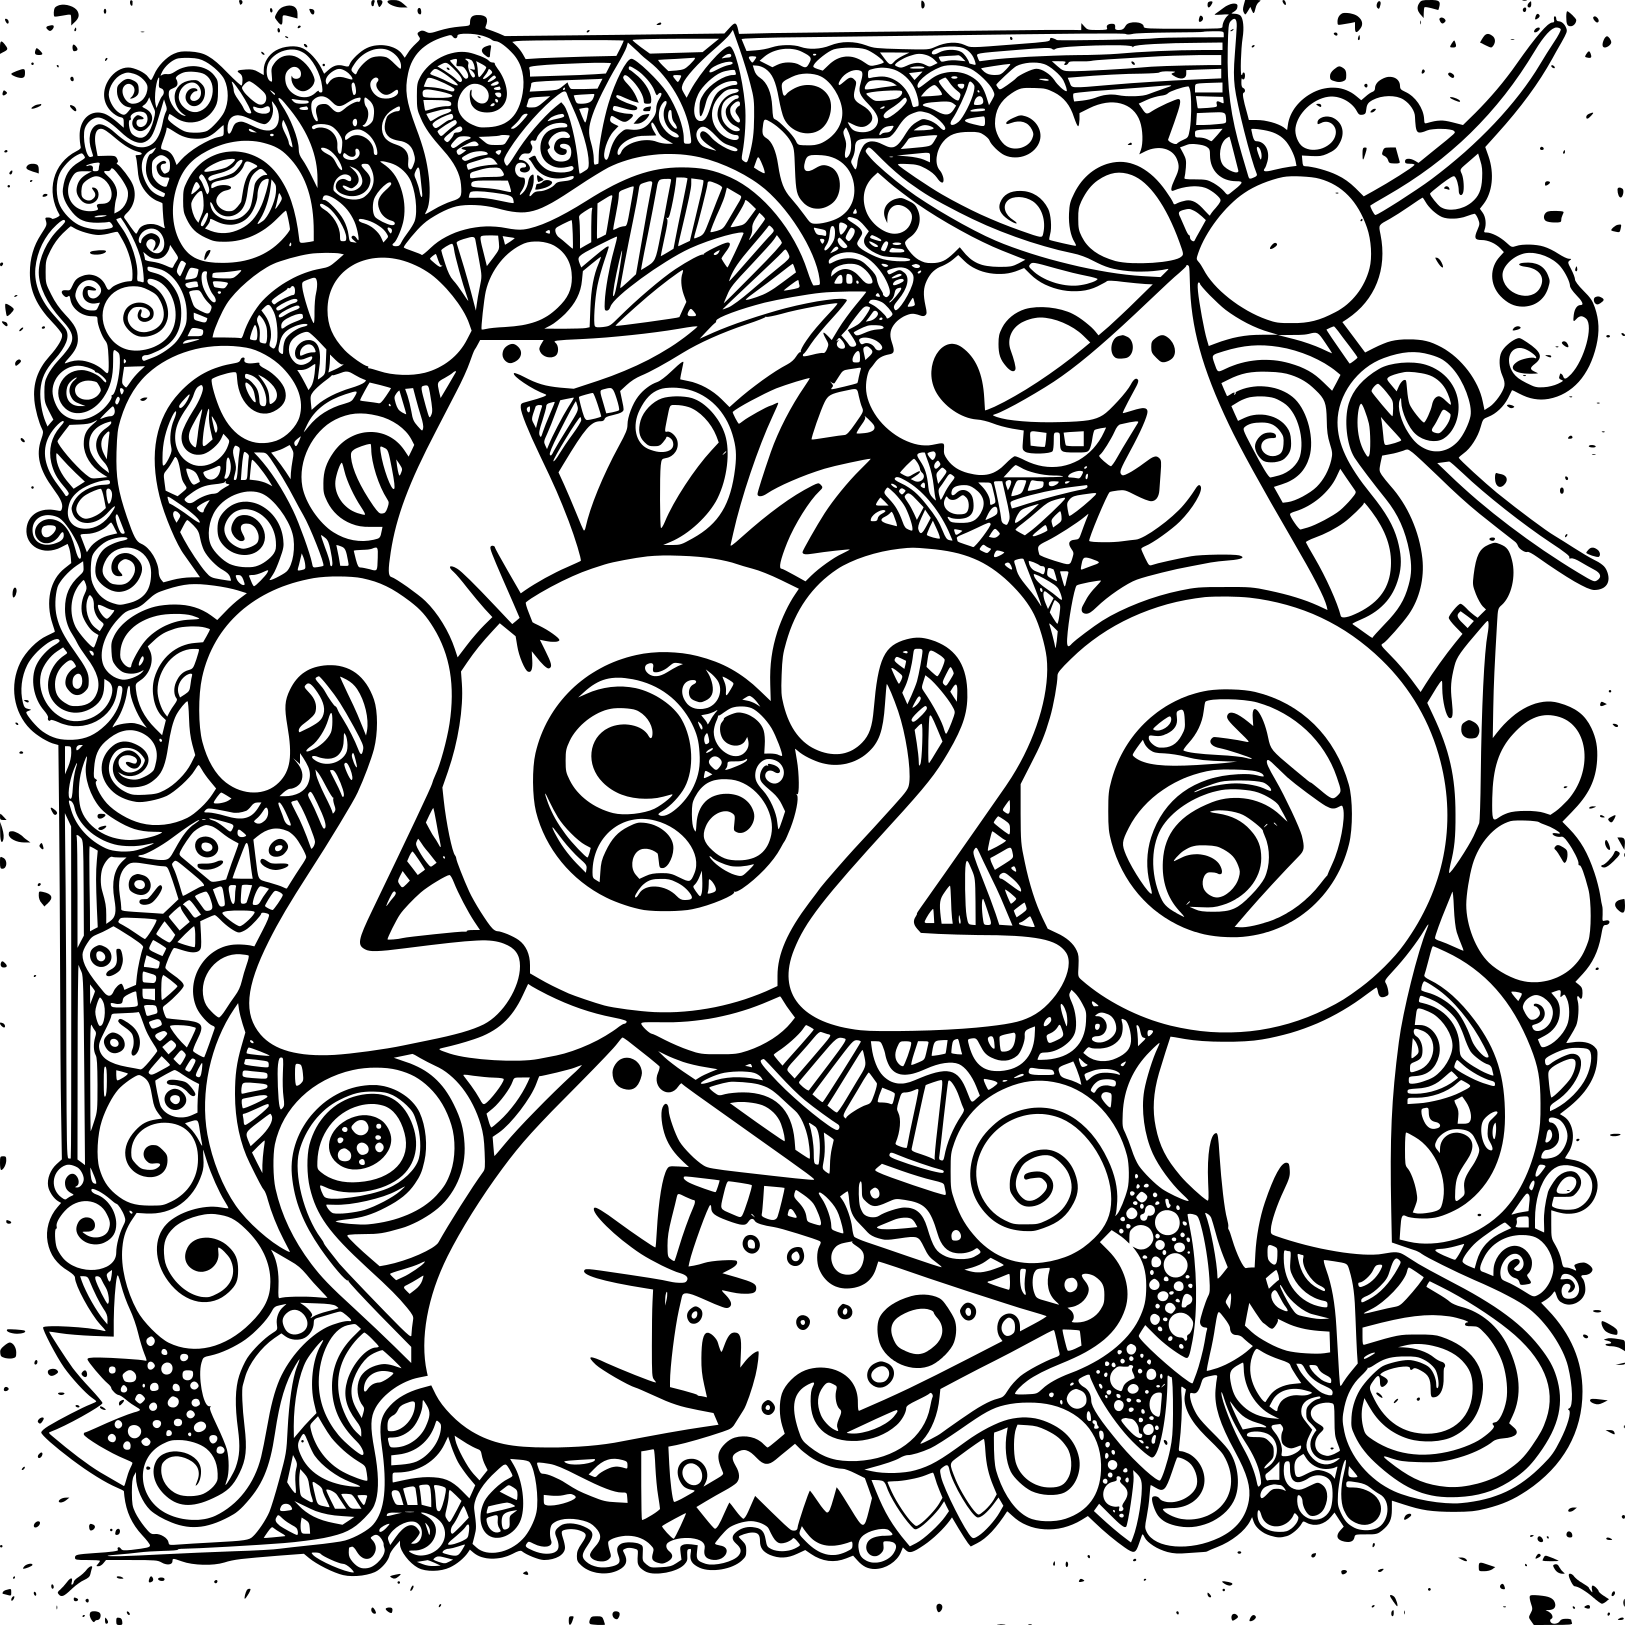 Happy New Year 2020 Coloring Page